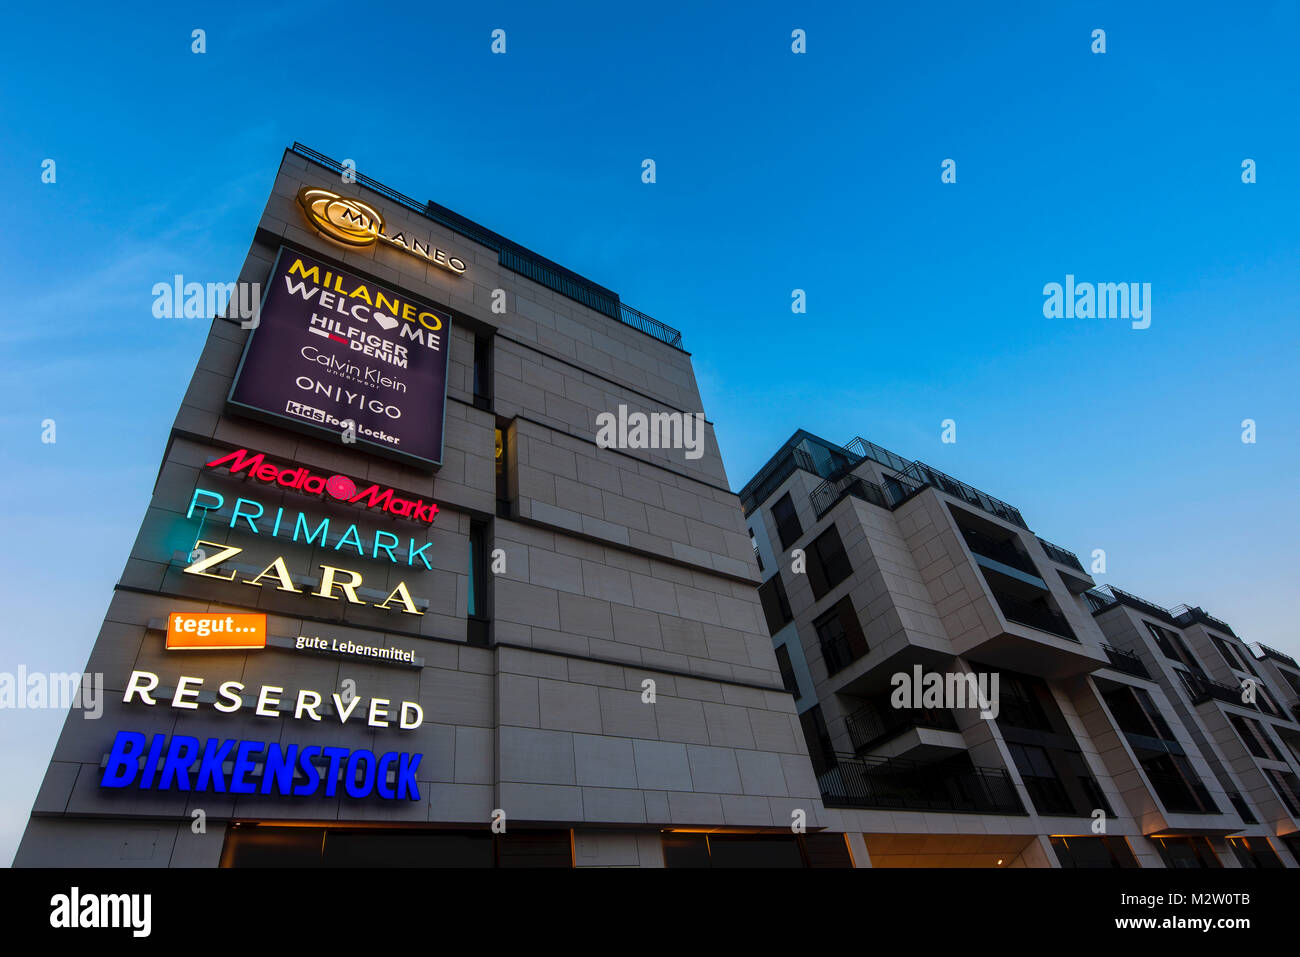 New Square Shopping Centre High Resolution Stock Photography and Images -  Alamy